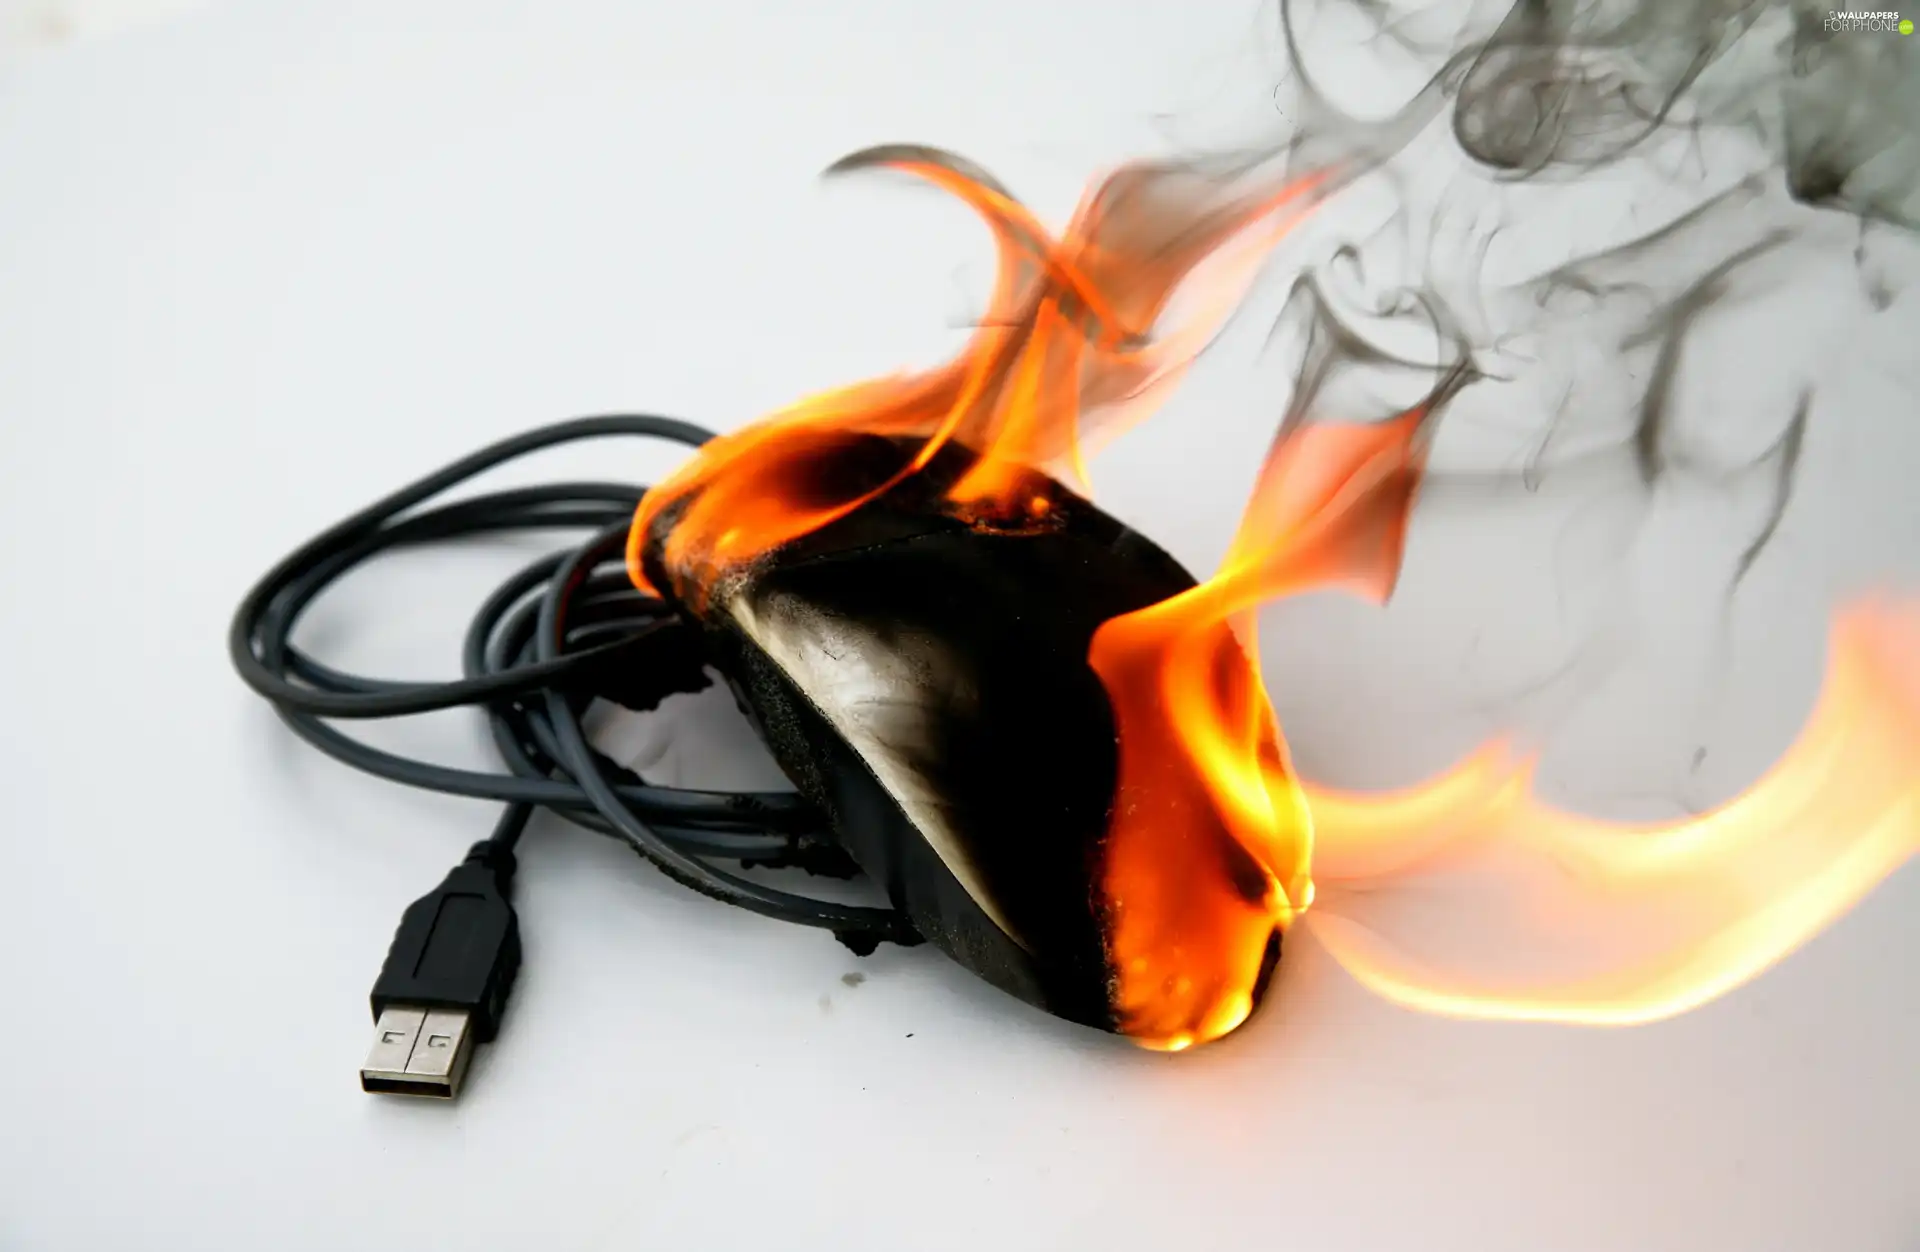 Wired, Burning, flame, smoke, USB, mouse